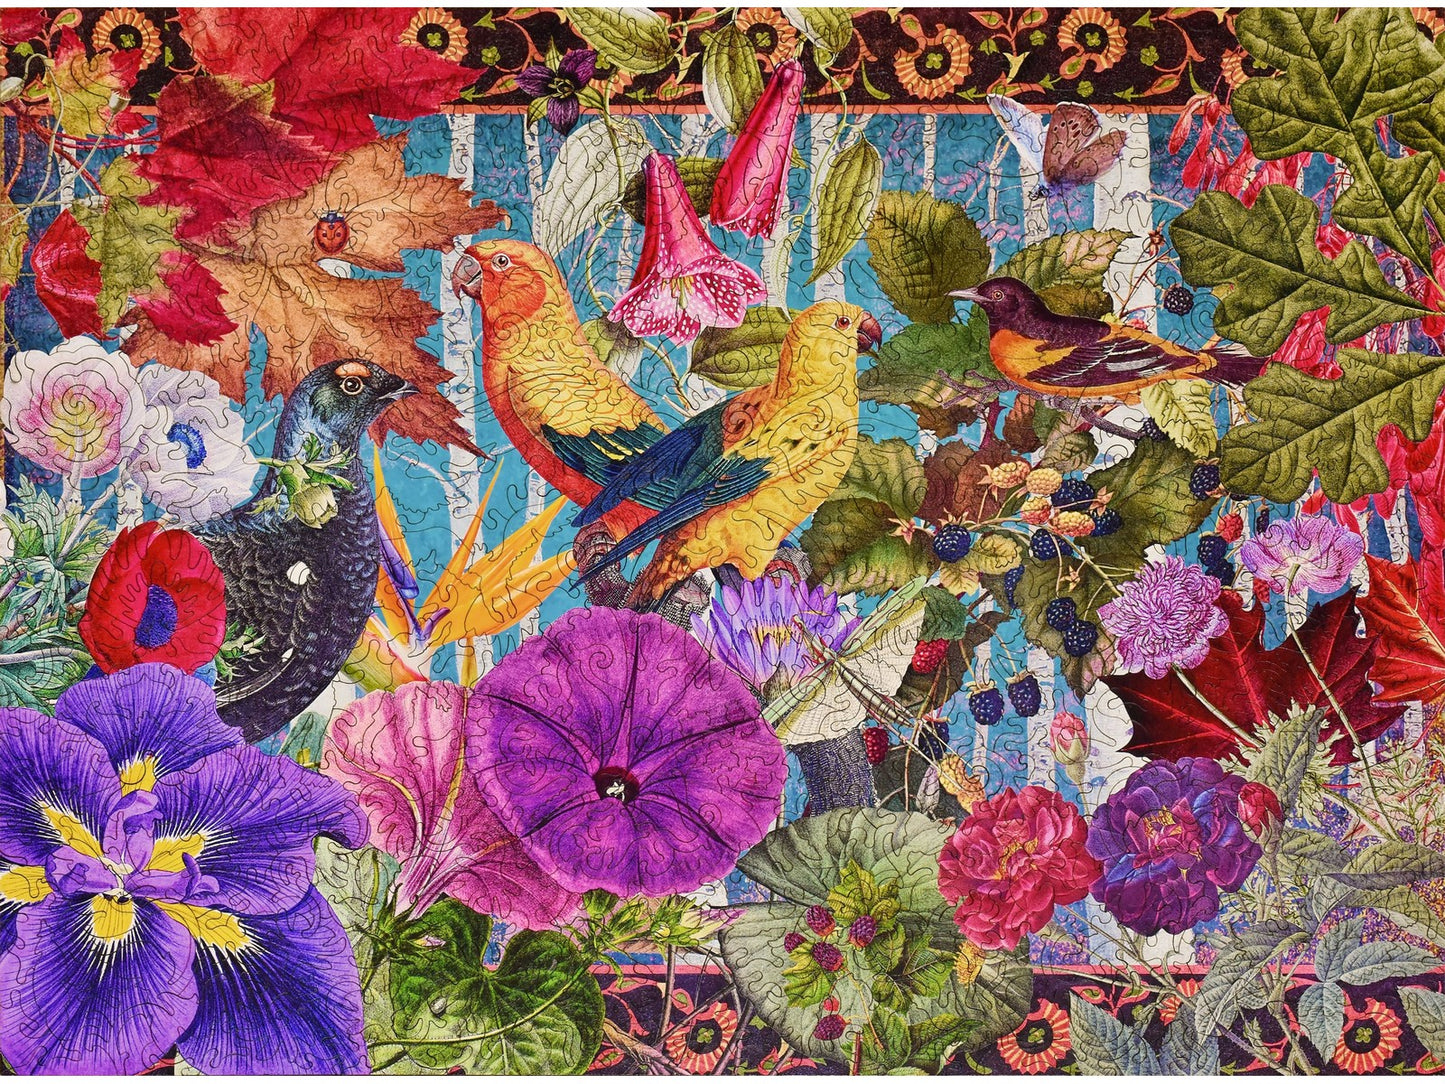 The front of the puzzle, Love Birds - Birds of Paradise, showing colorful birds and flowers.